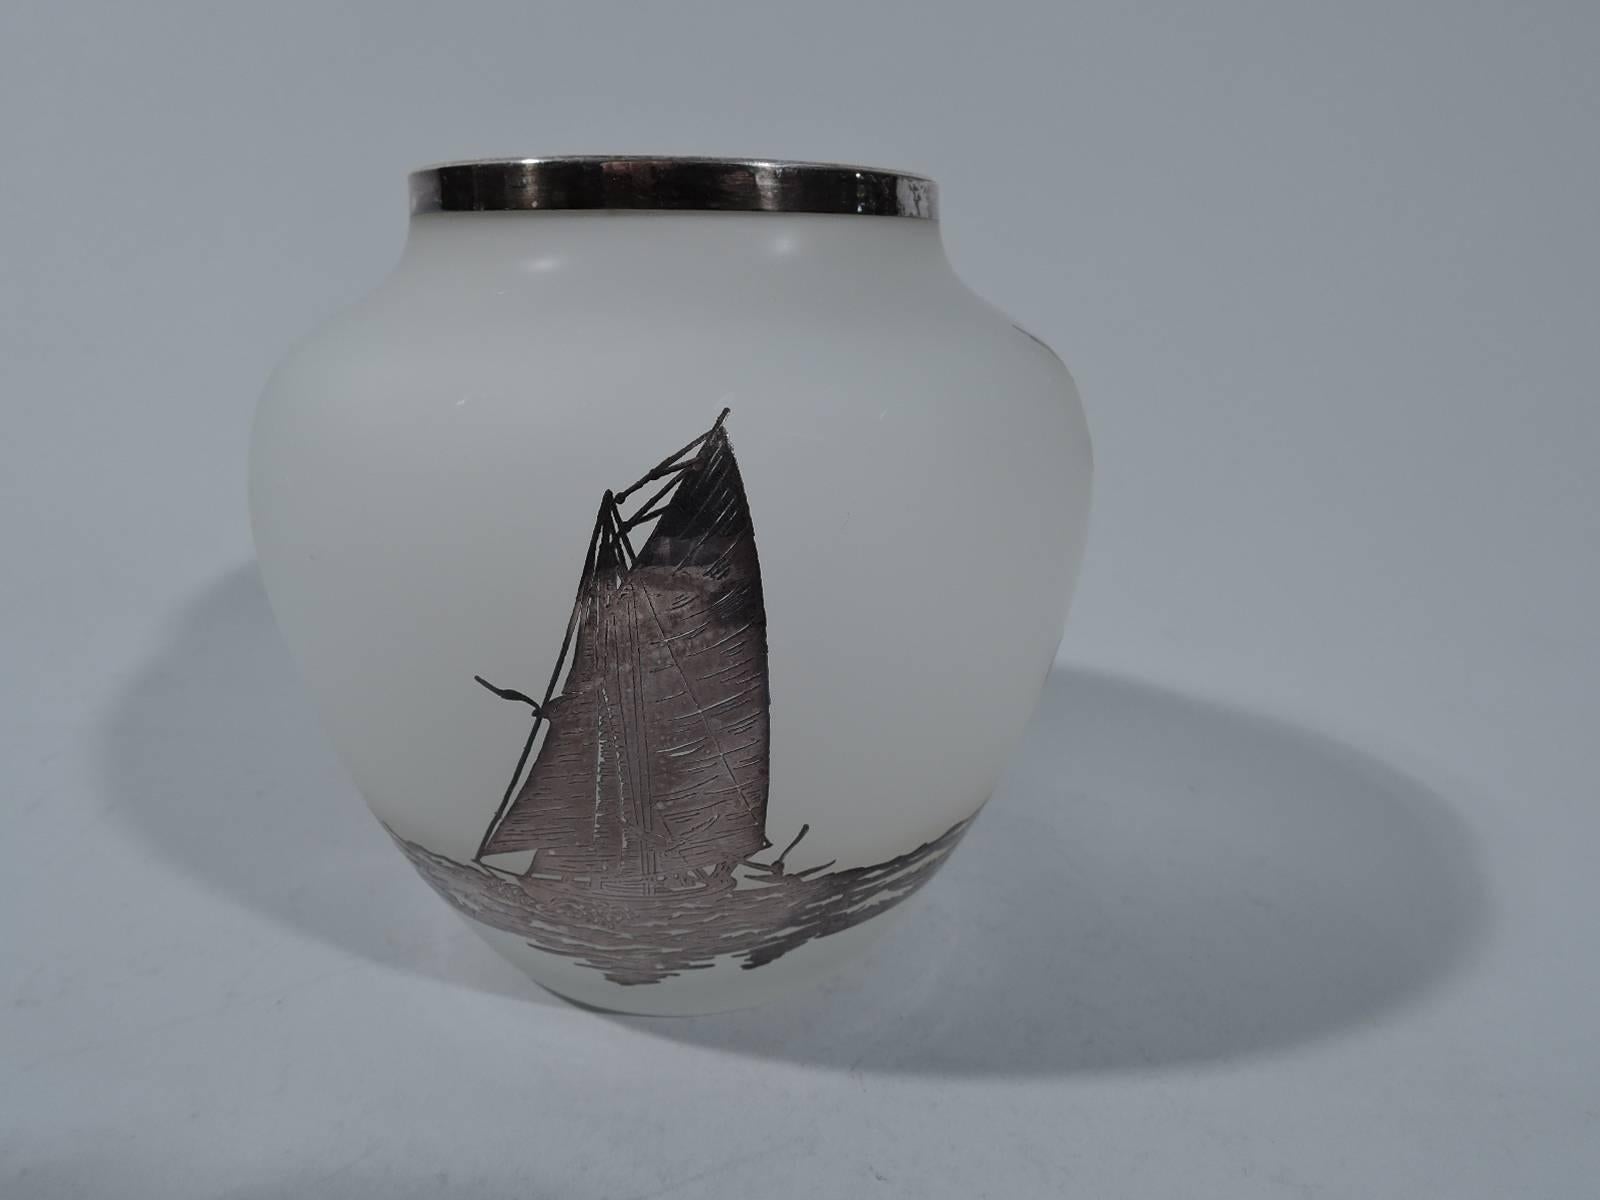 Antique camphor glass baluster vase with pictorial silver overlay. Glass is white and overlaid with seascape: wraparound waves with hovering seagulls and solitary sailboat. Unmarked. Very good condition.

Dimensions: H 4 3/4 x D 4 1/2 in. BM689.